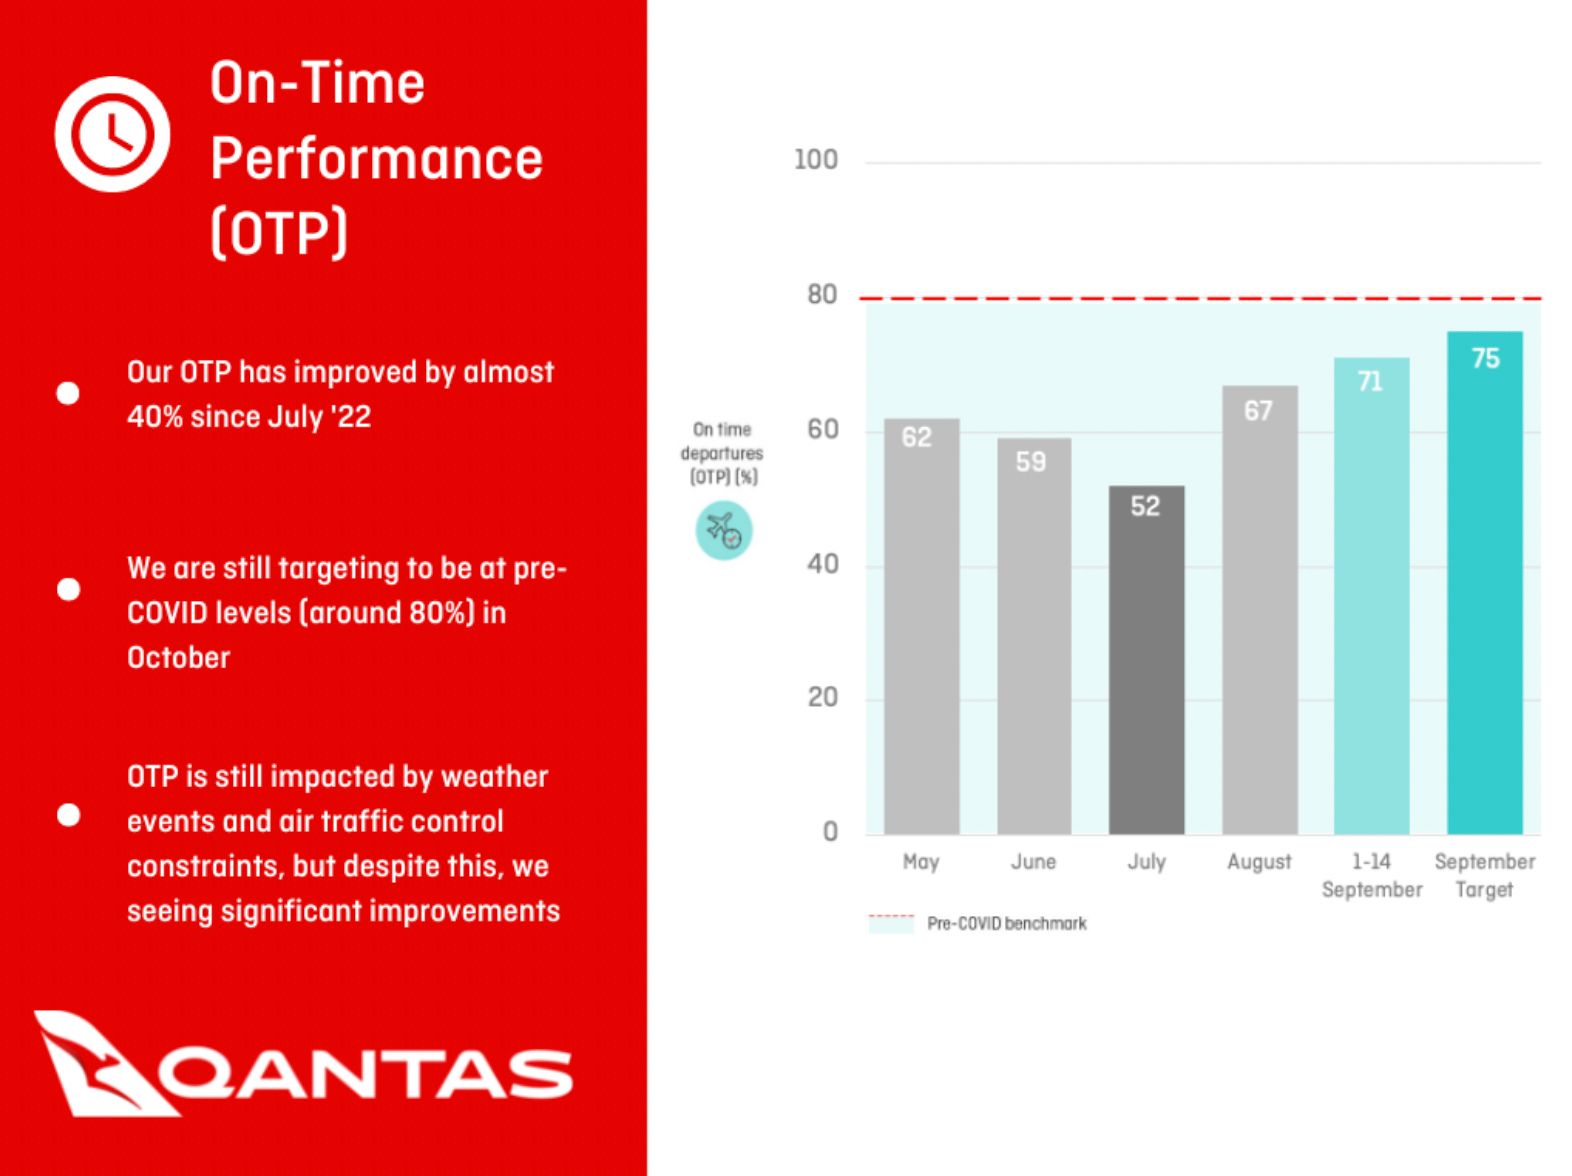 Qantas On Time Performance has jumped to 71% in September